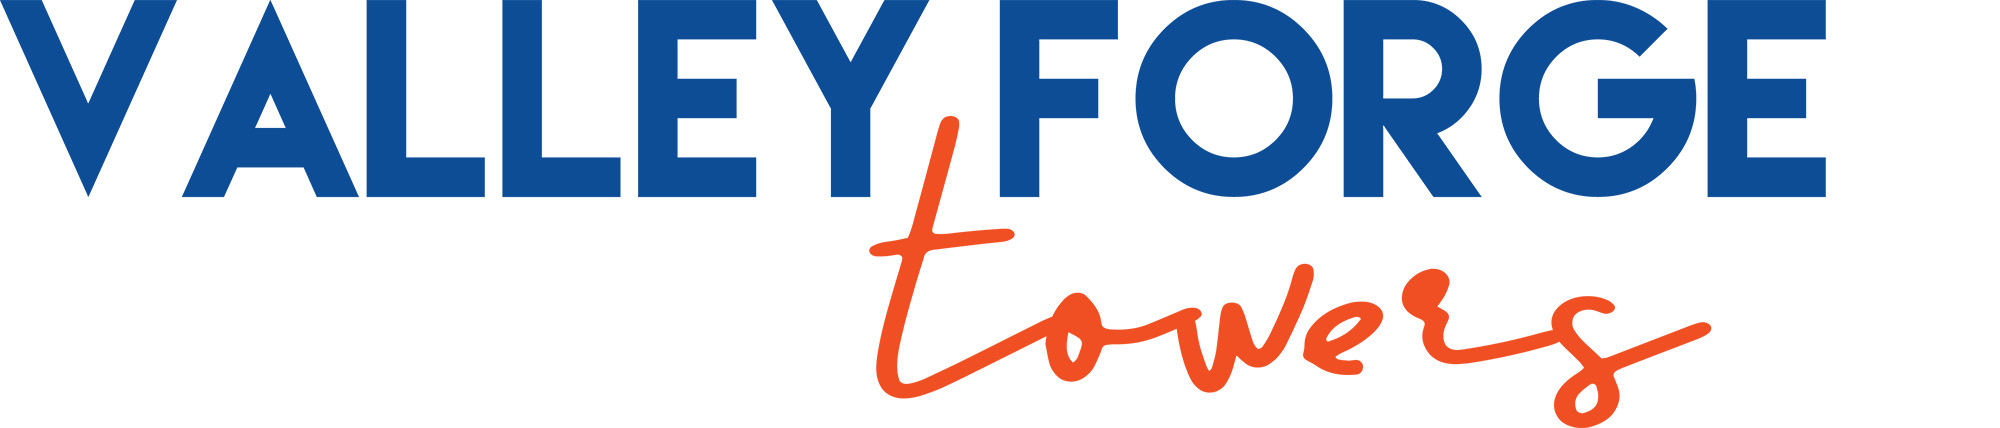 valley forge towers logo